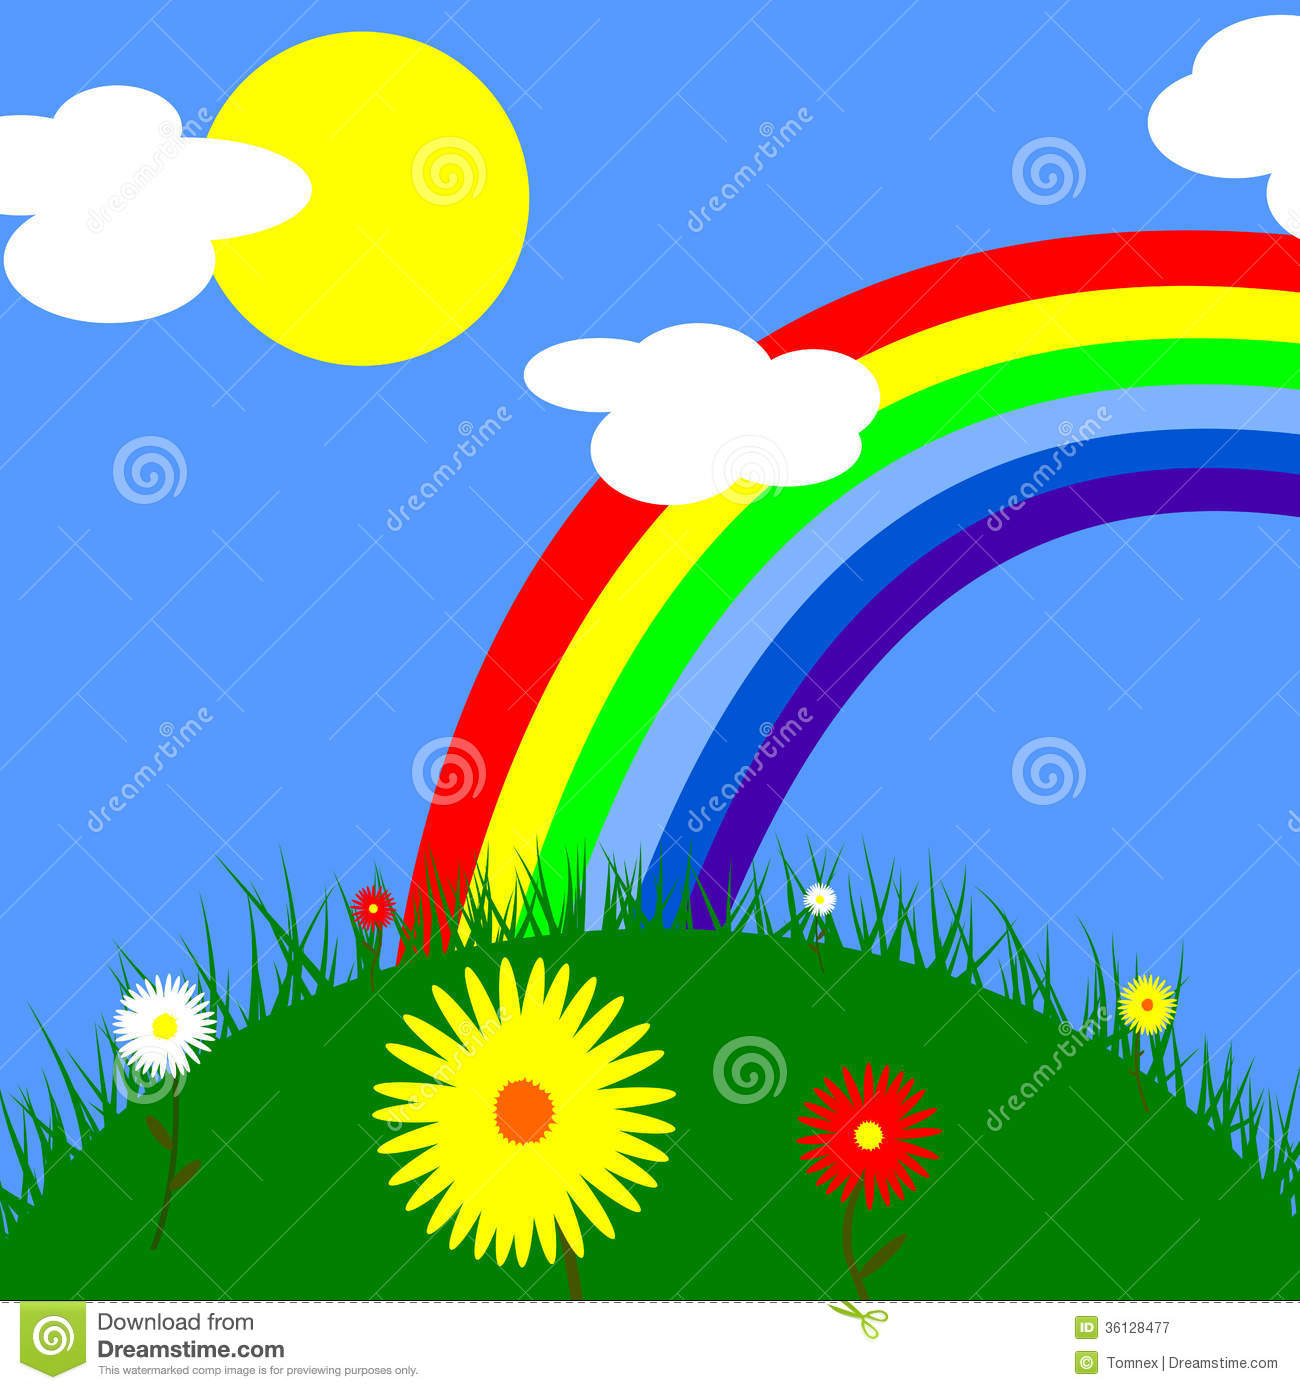 Grassy Hill As A Concept For Nice Weather Summer Spring Or Nature